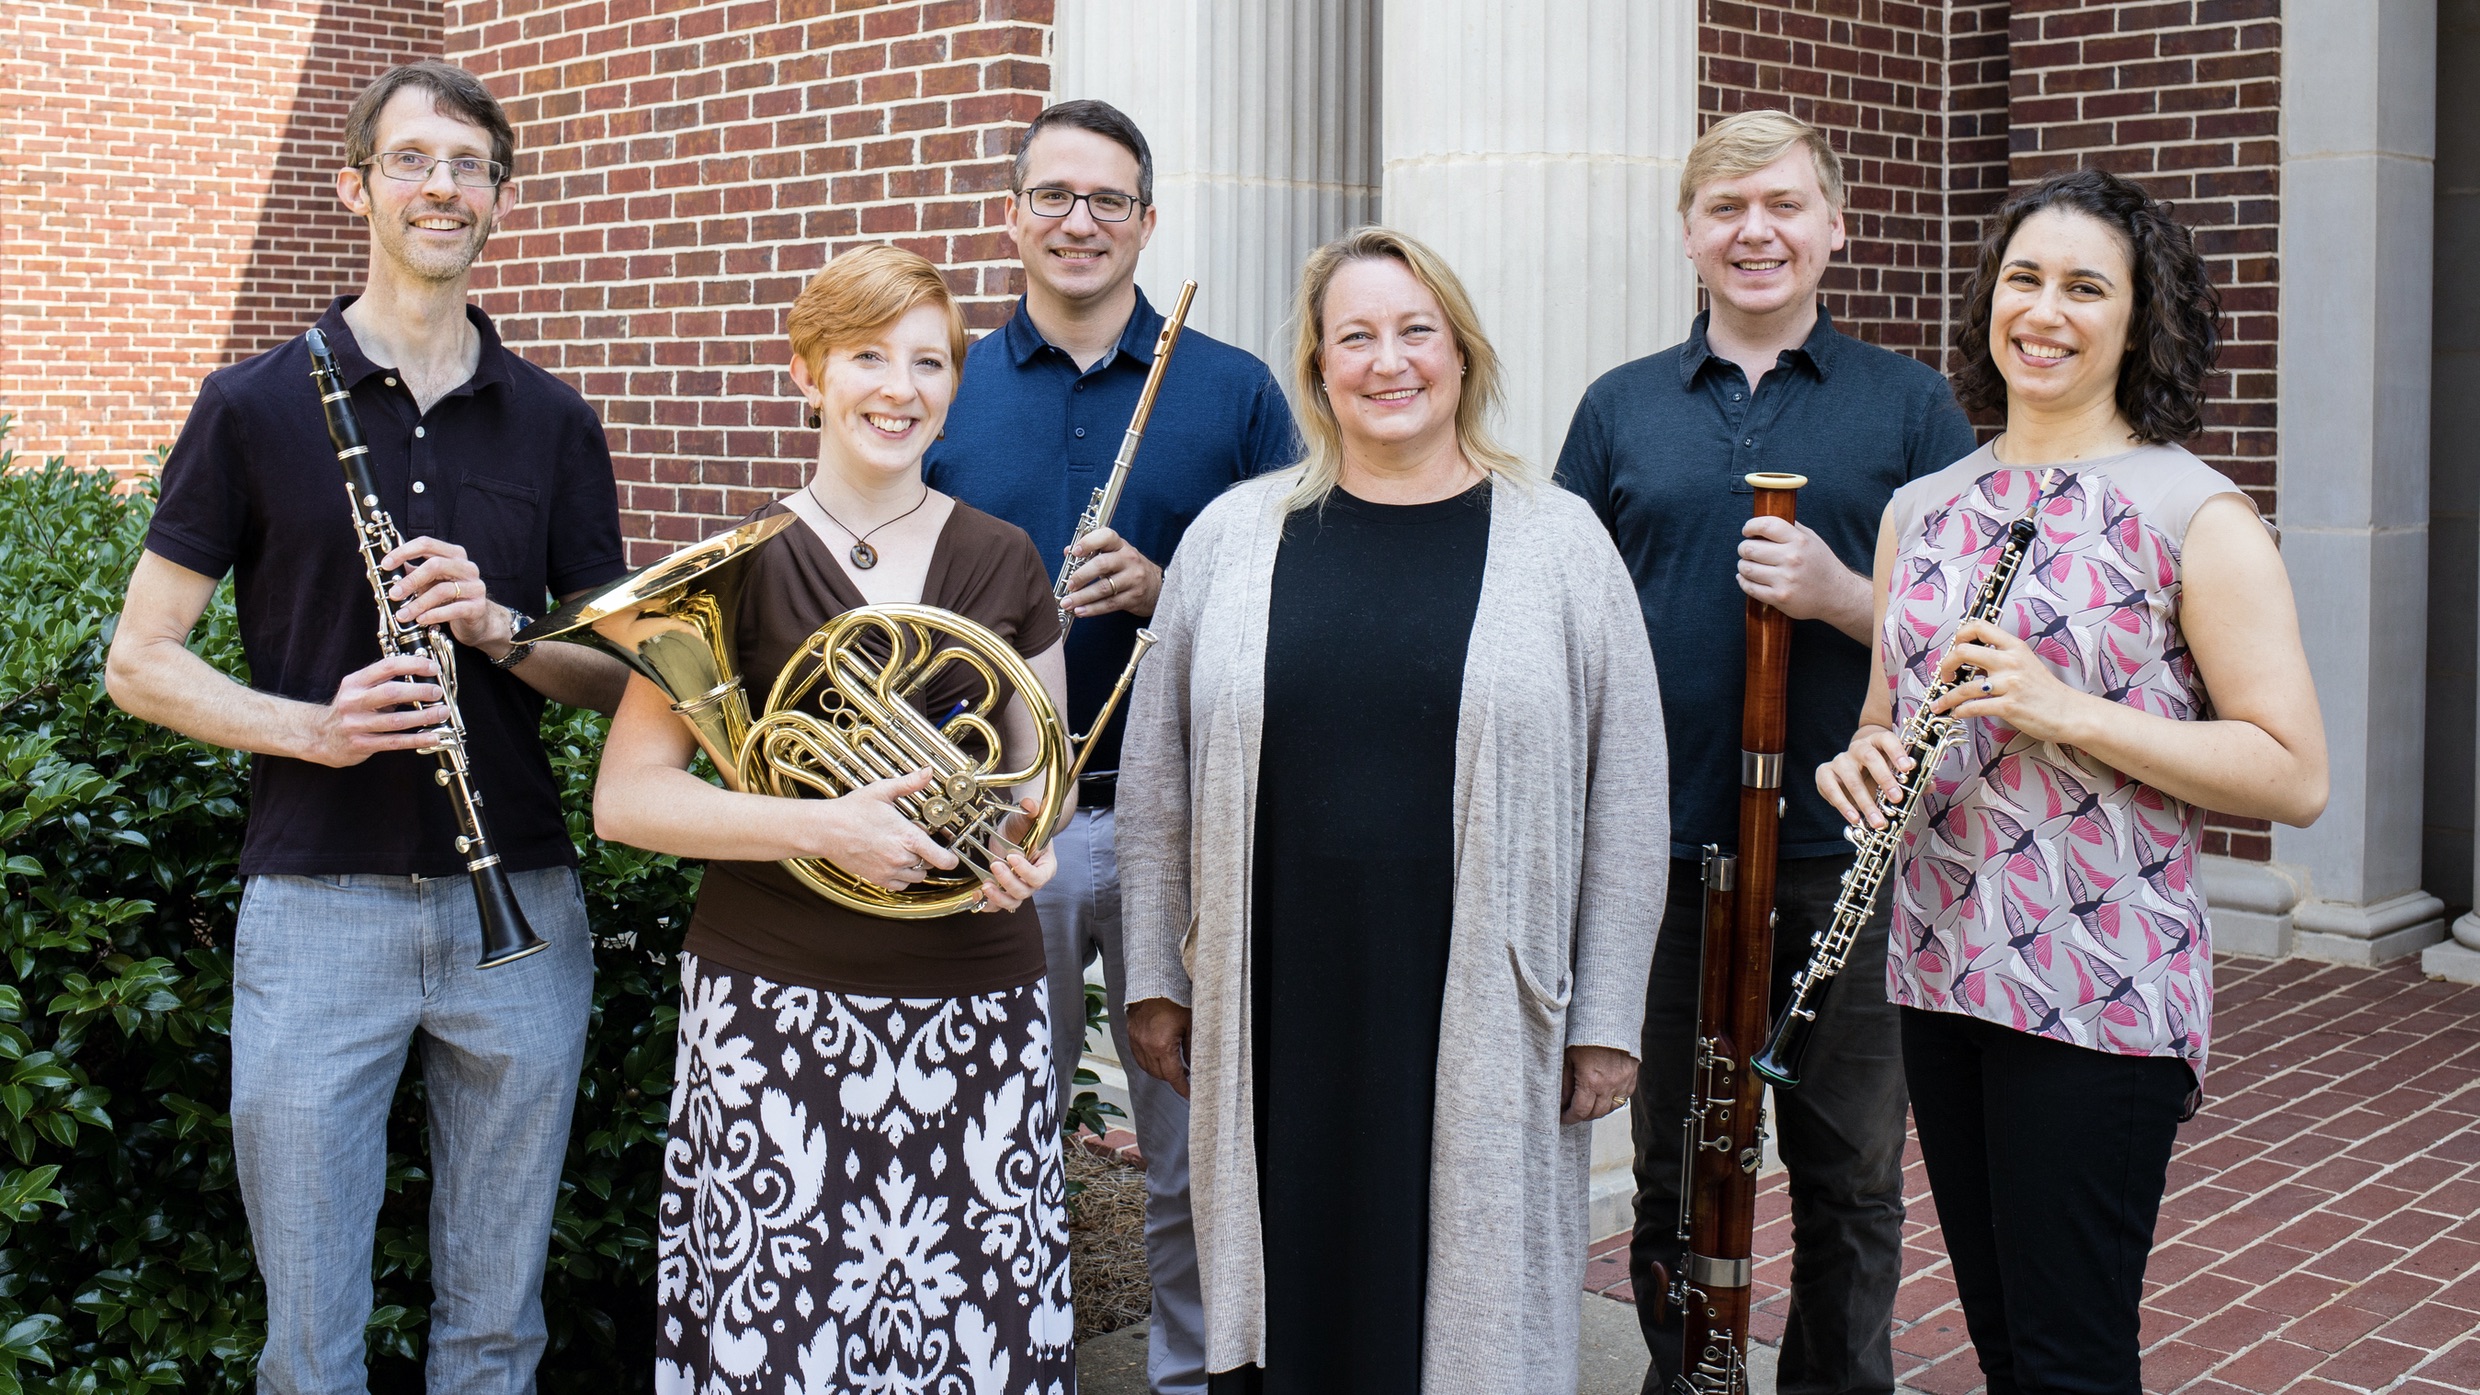 Members of Ricercata Winds woodwind quintet